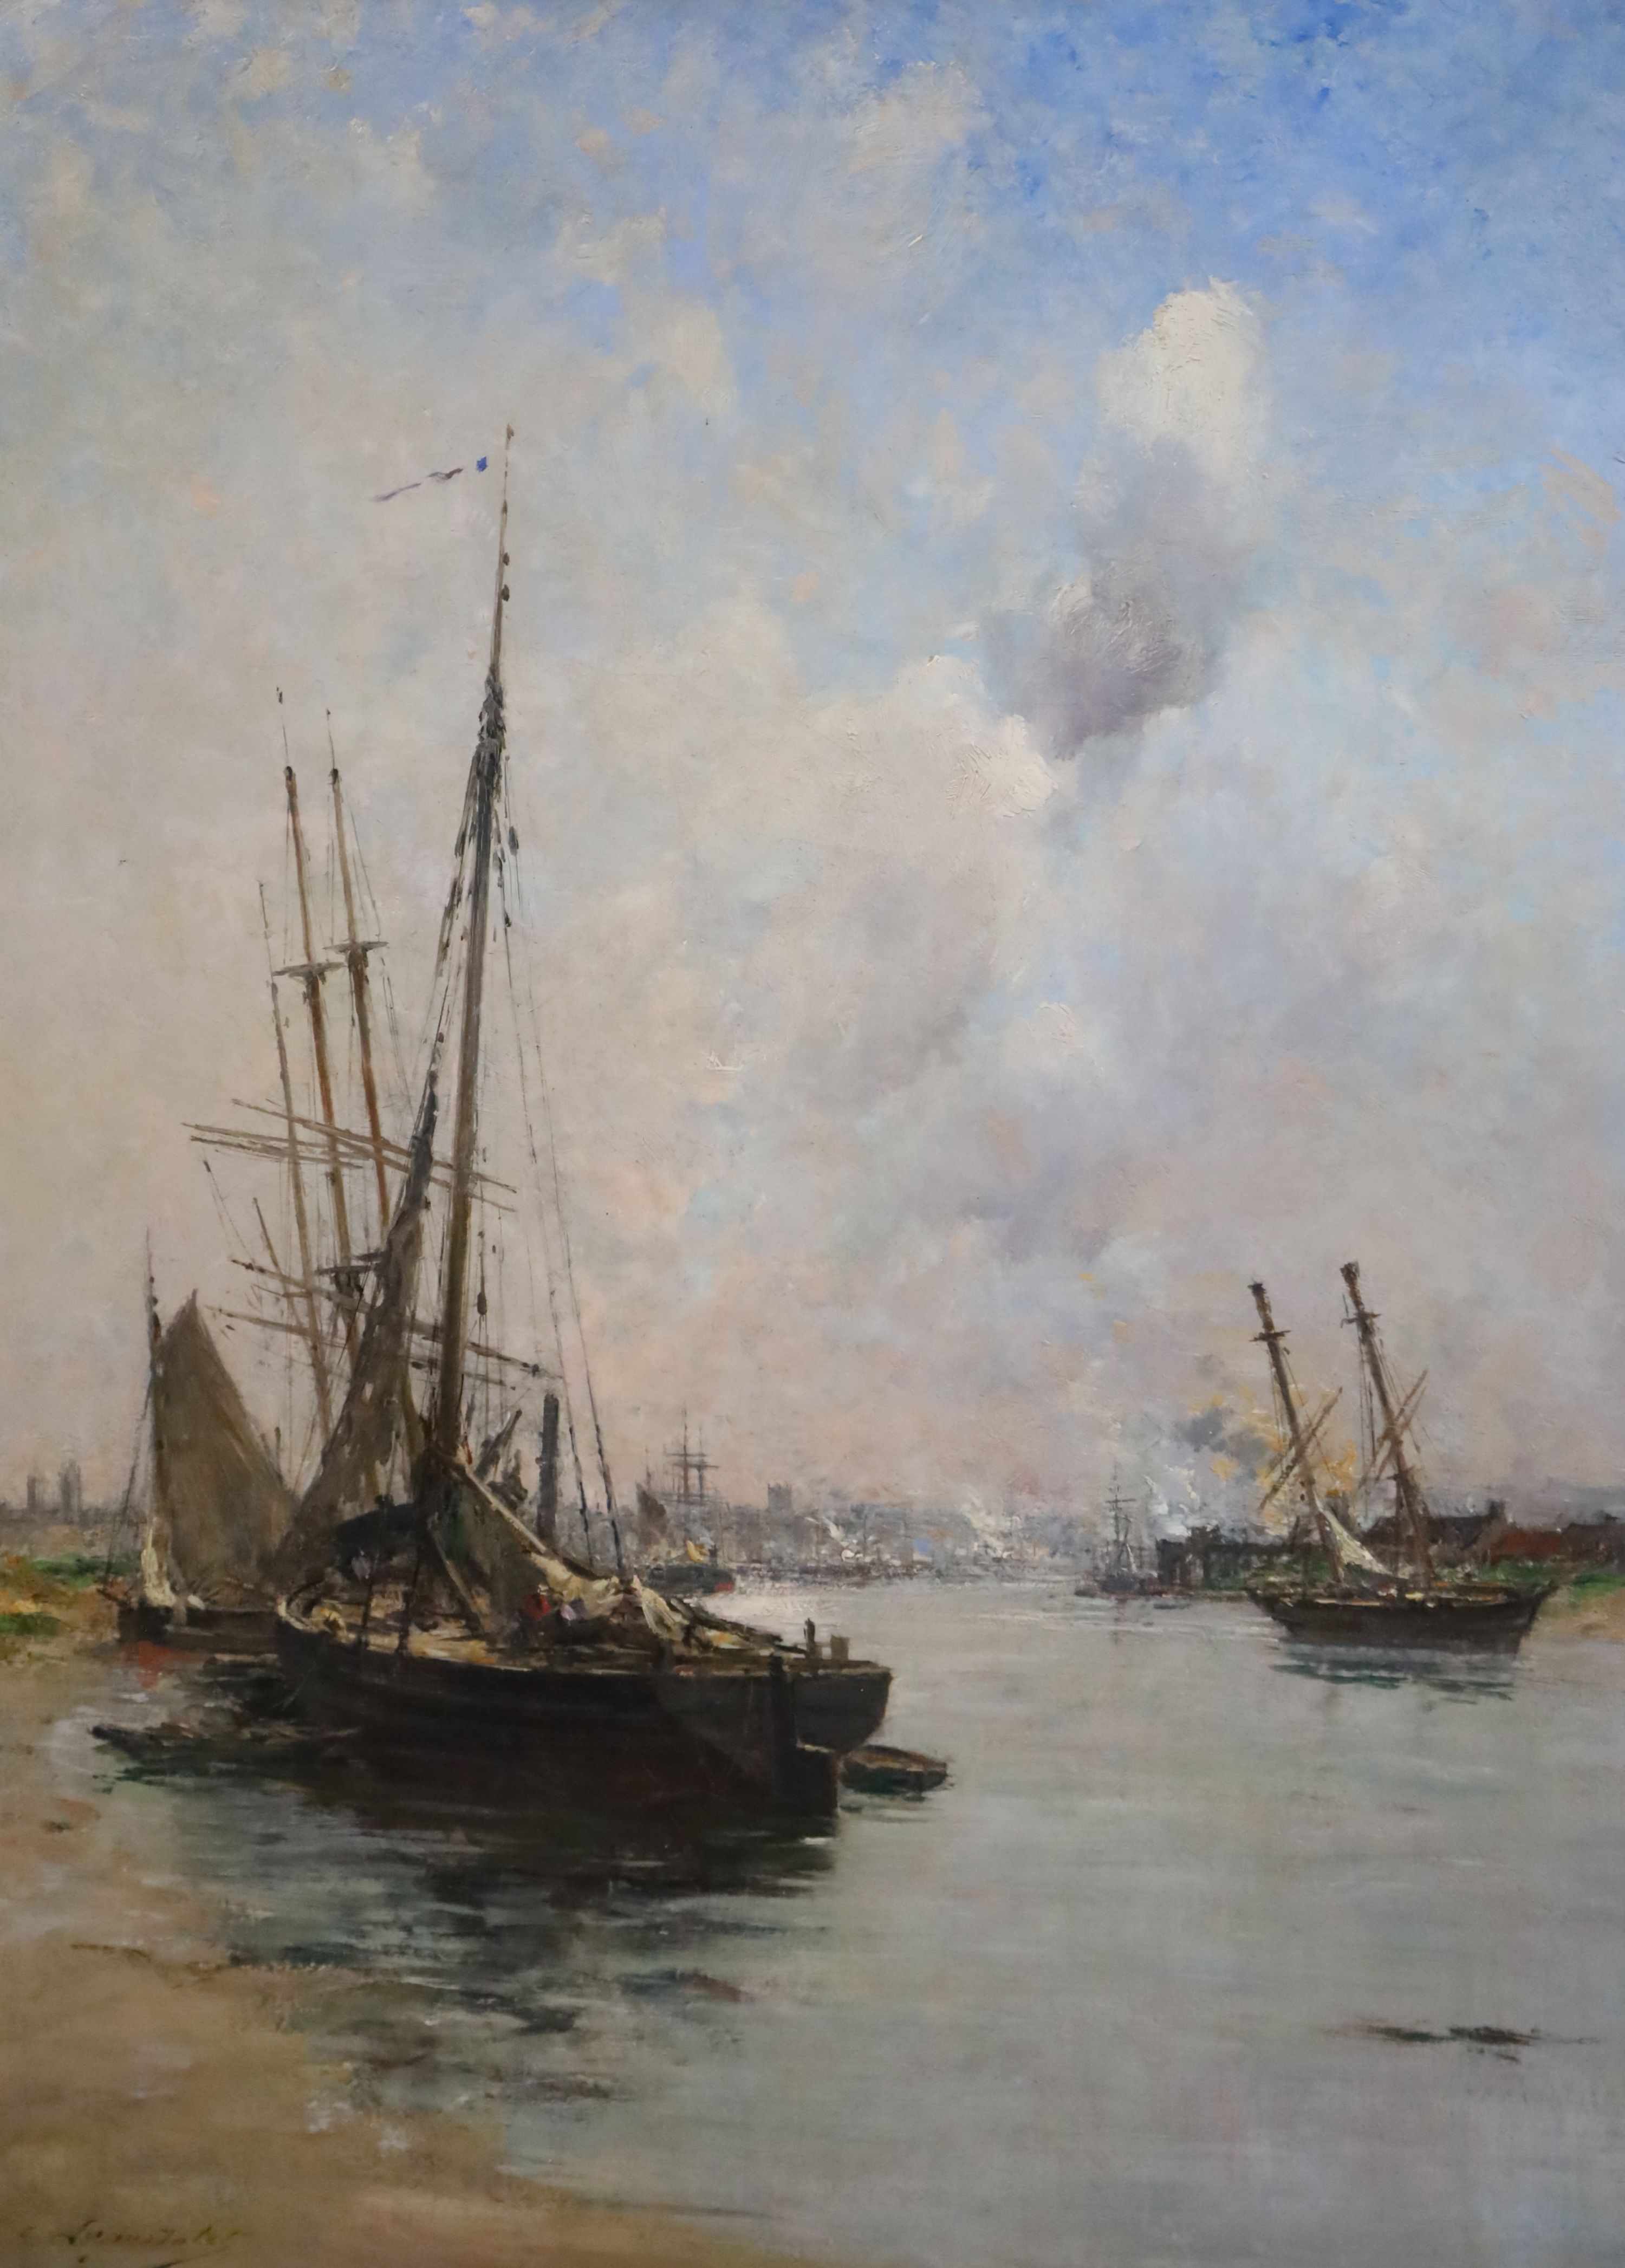 Charles Lapostolet (1824-1890), Boats moored on the river above Rouen, oil on canvas, 72.5 x 52cm